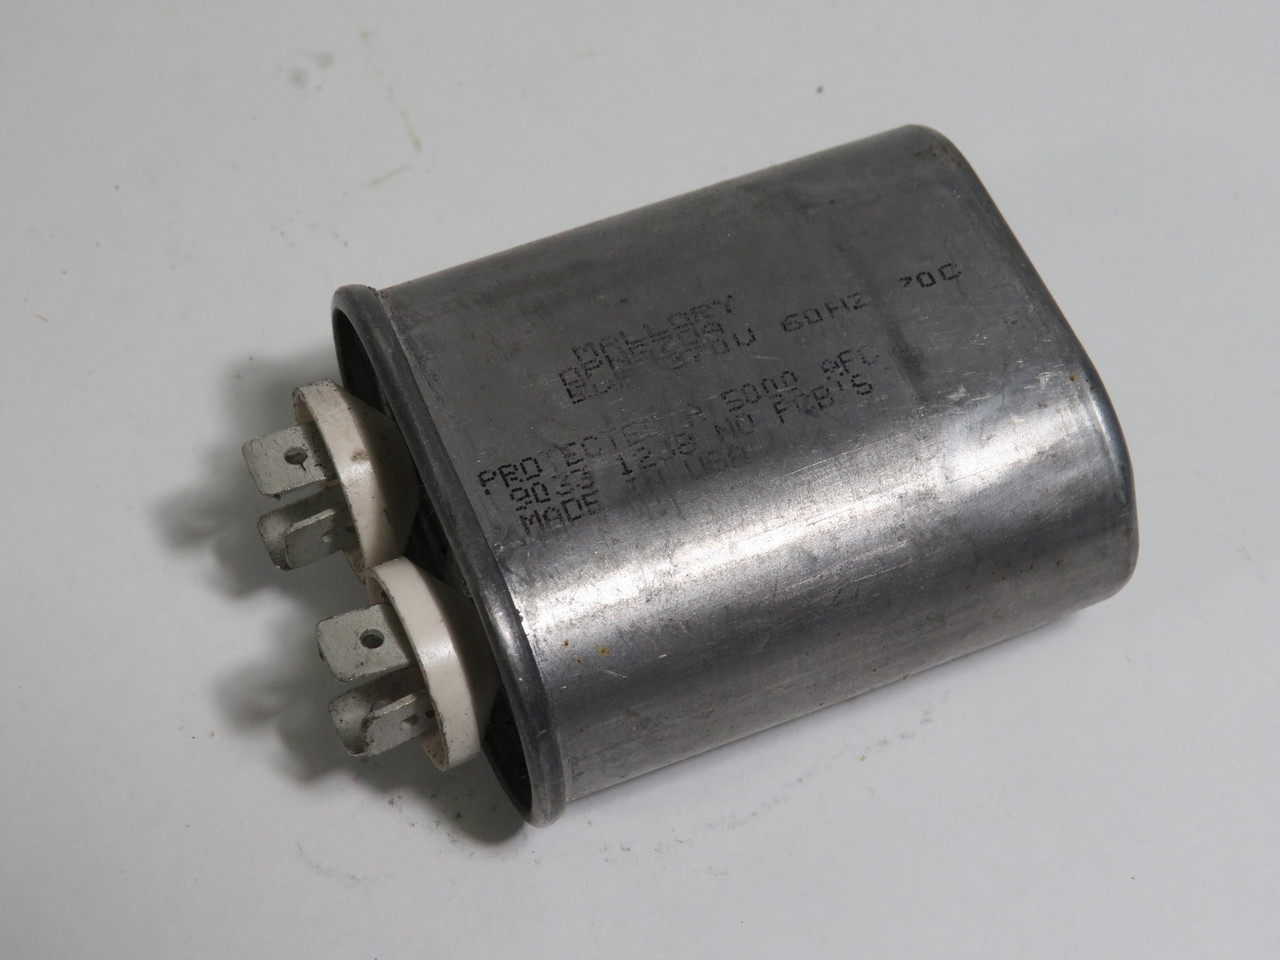 Cornell Dubilier Mallory OPN570A Capacitor 5UF 370V 60HZ 70C USED